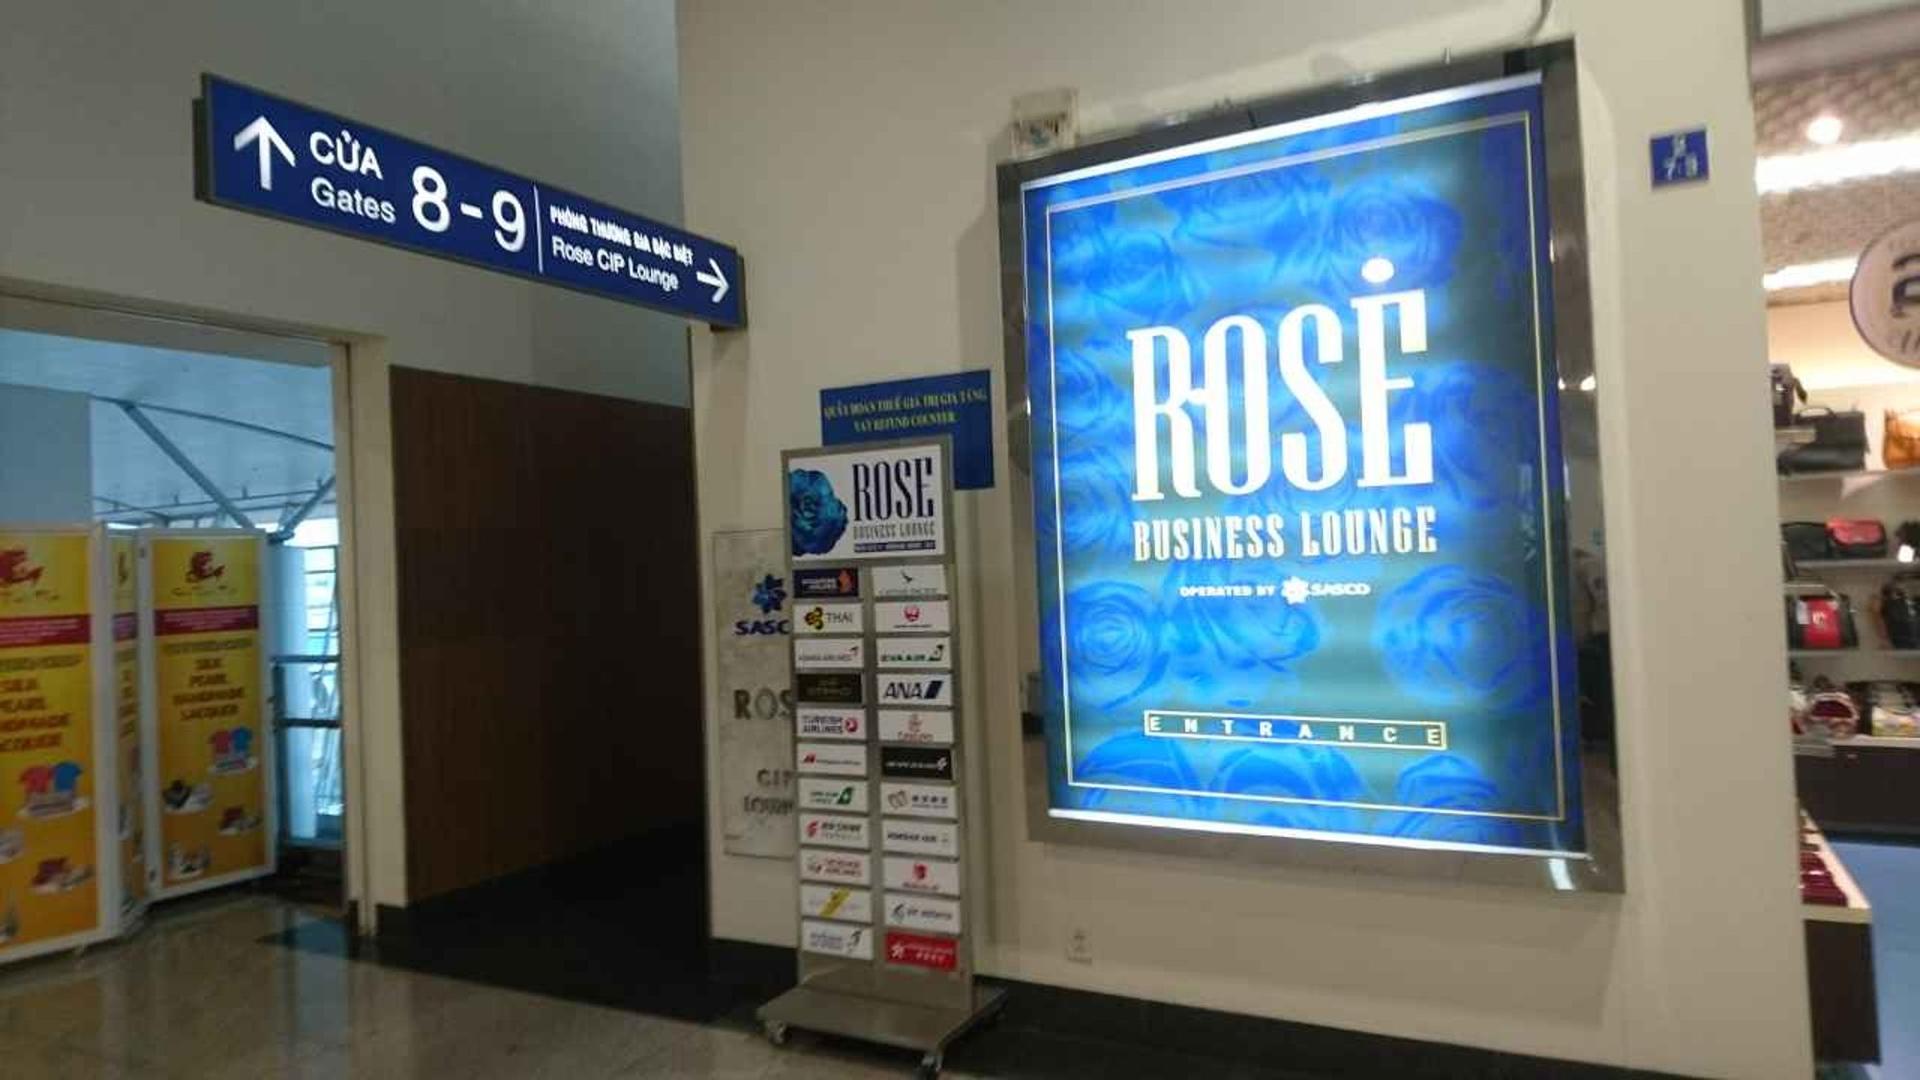 Rose Business Lounge image 13 of 26